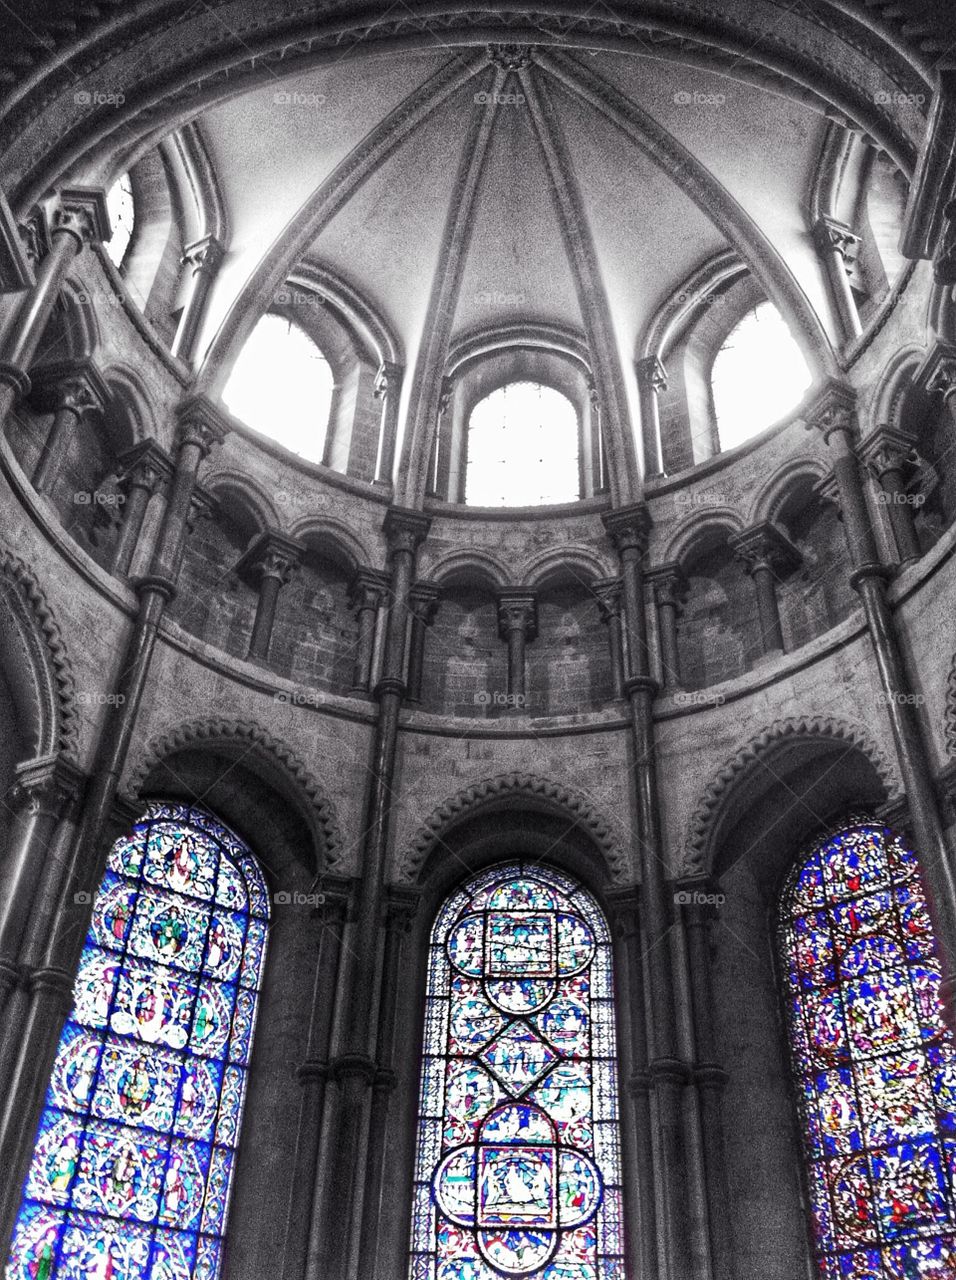 Stained glass windows, black & white with a splash of colour 